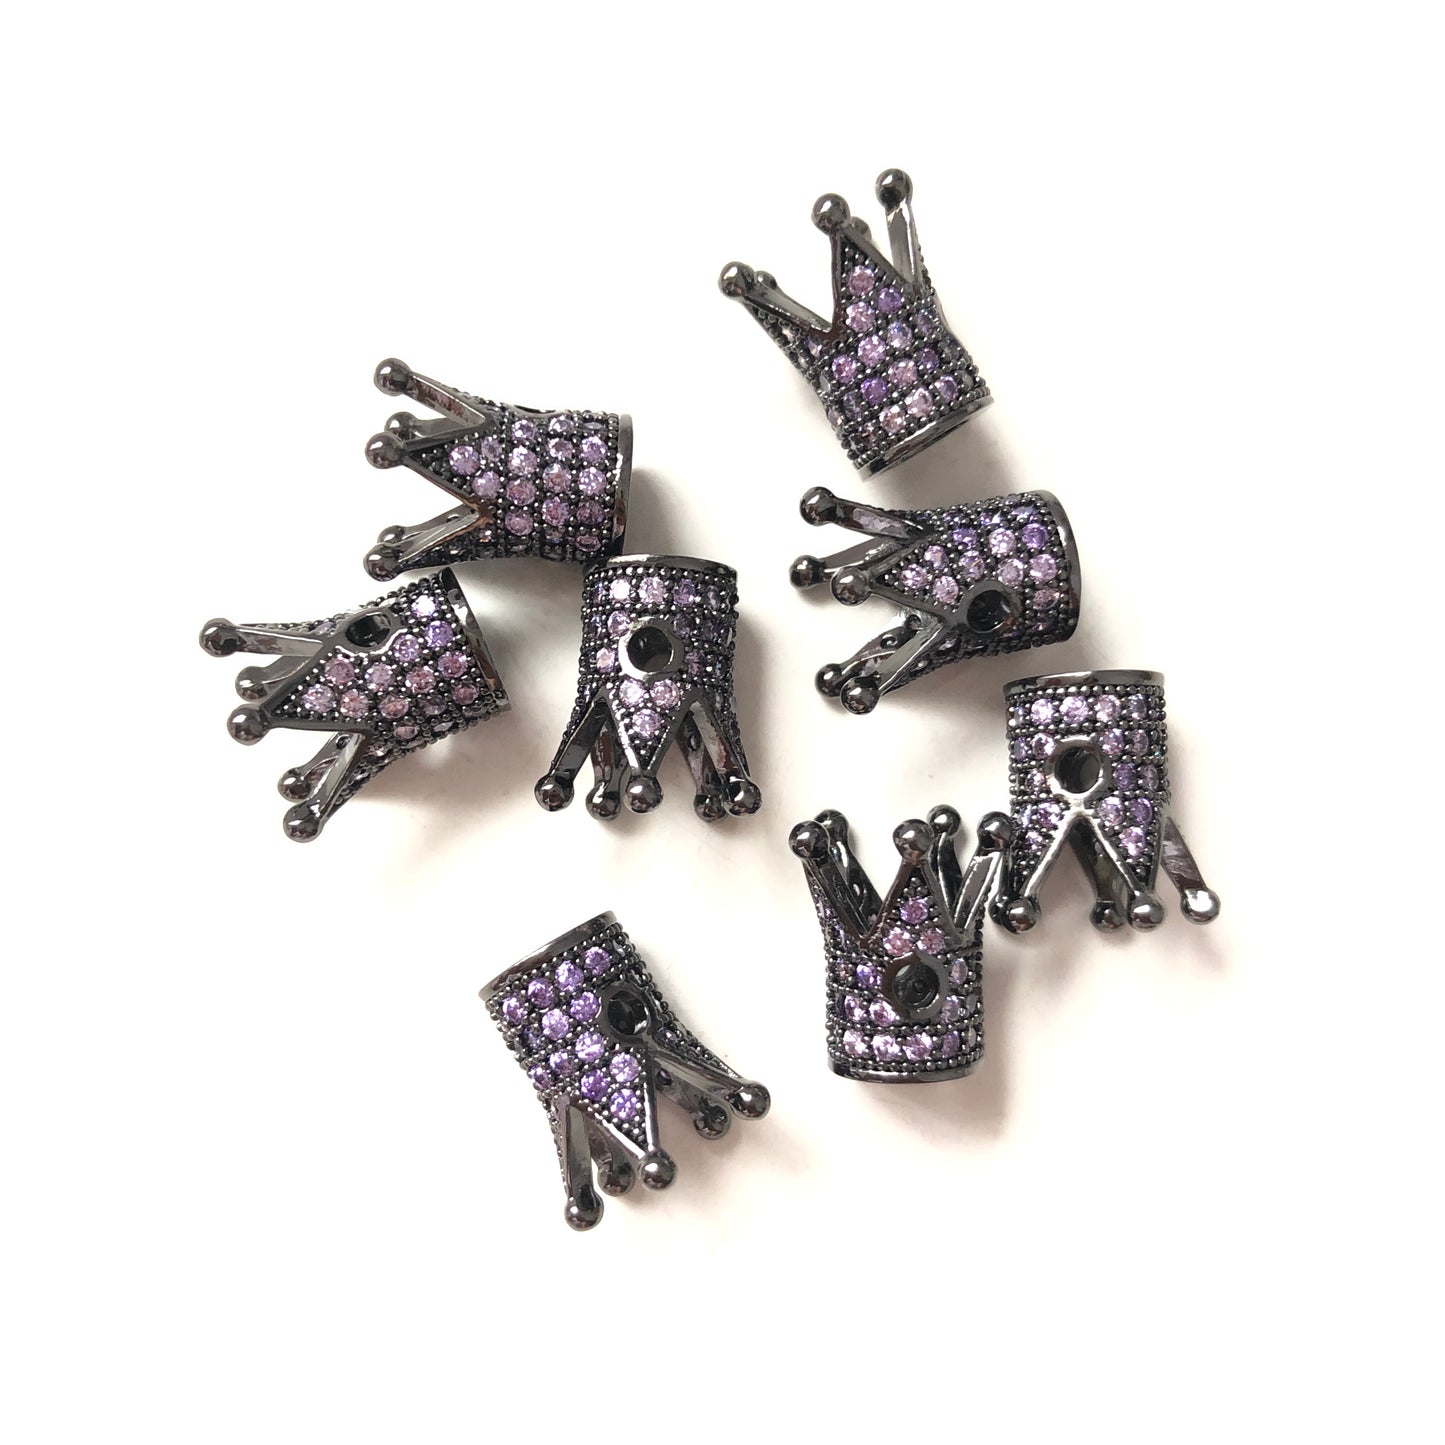 10pcs/lot Purple CZ Paved Crown Spacers Black CZ Paved Spacers Colorful Zirconia Crown Beads Charms Beads Beyond